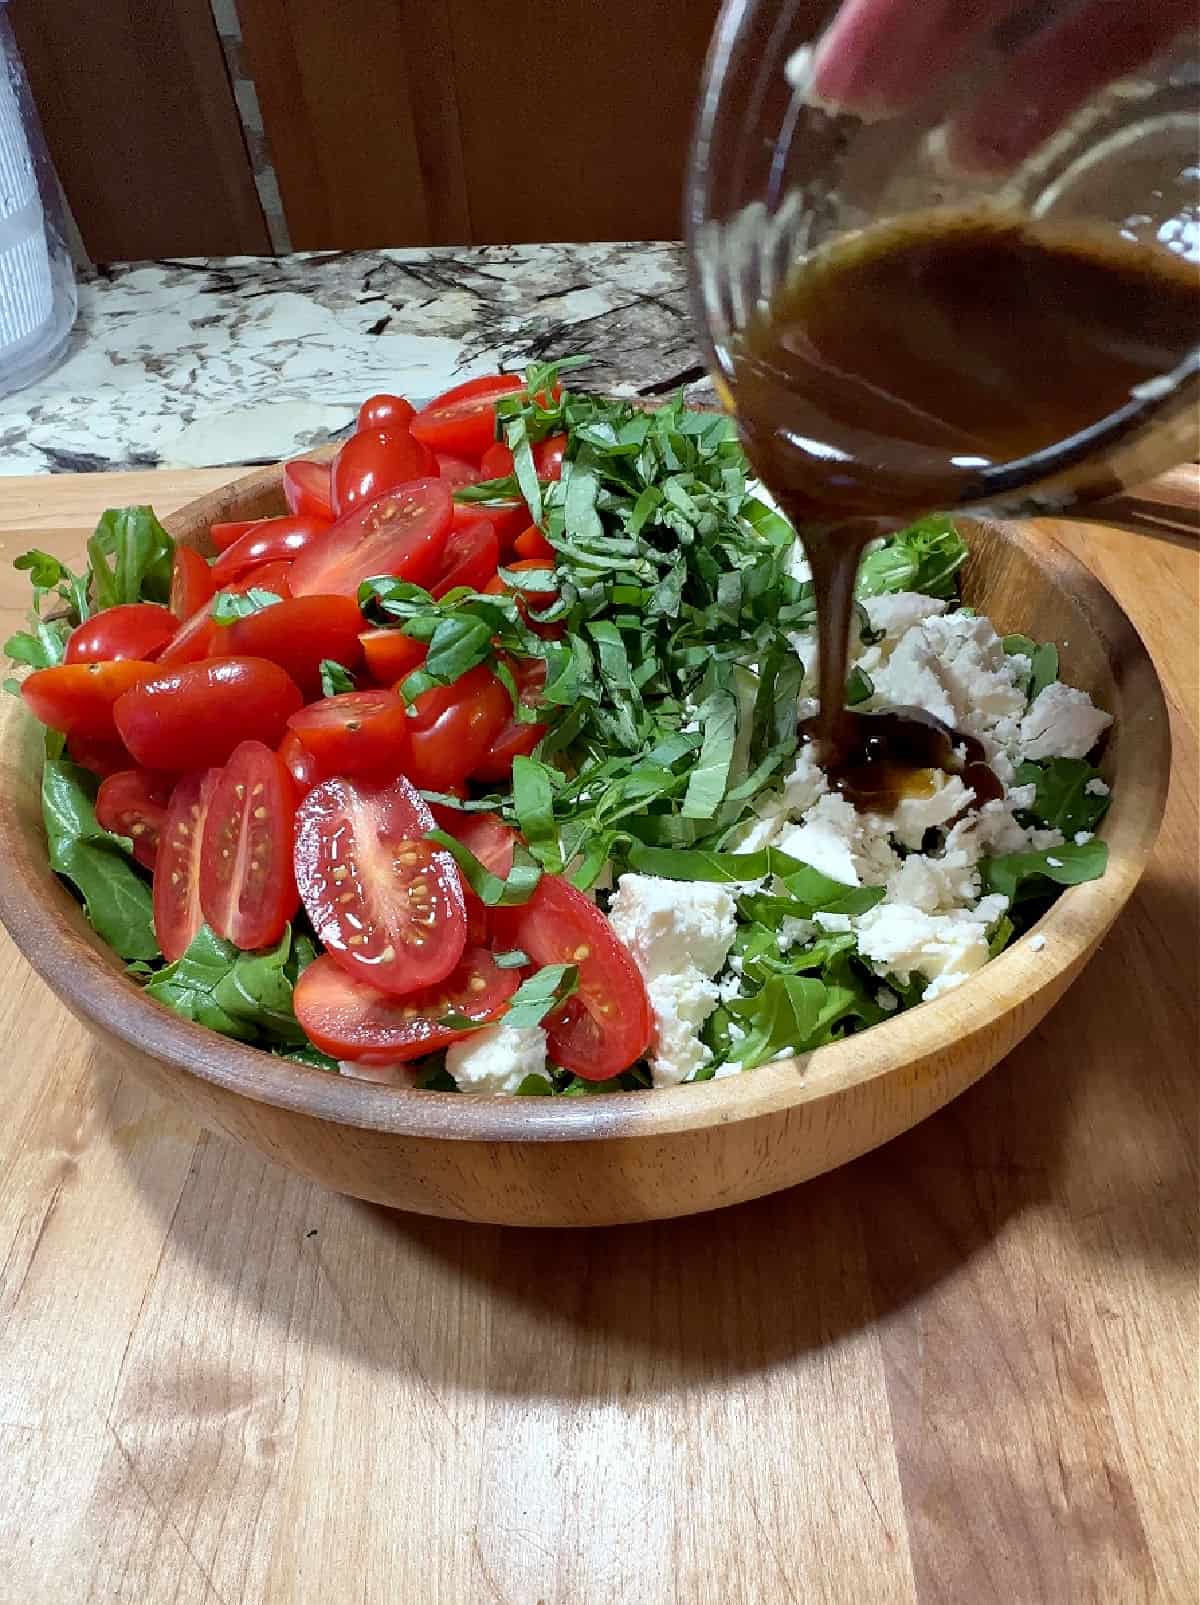 small cup of balsamic dressing pouring onto the salad.